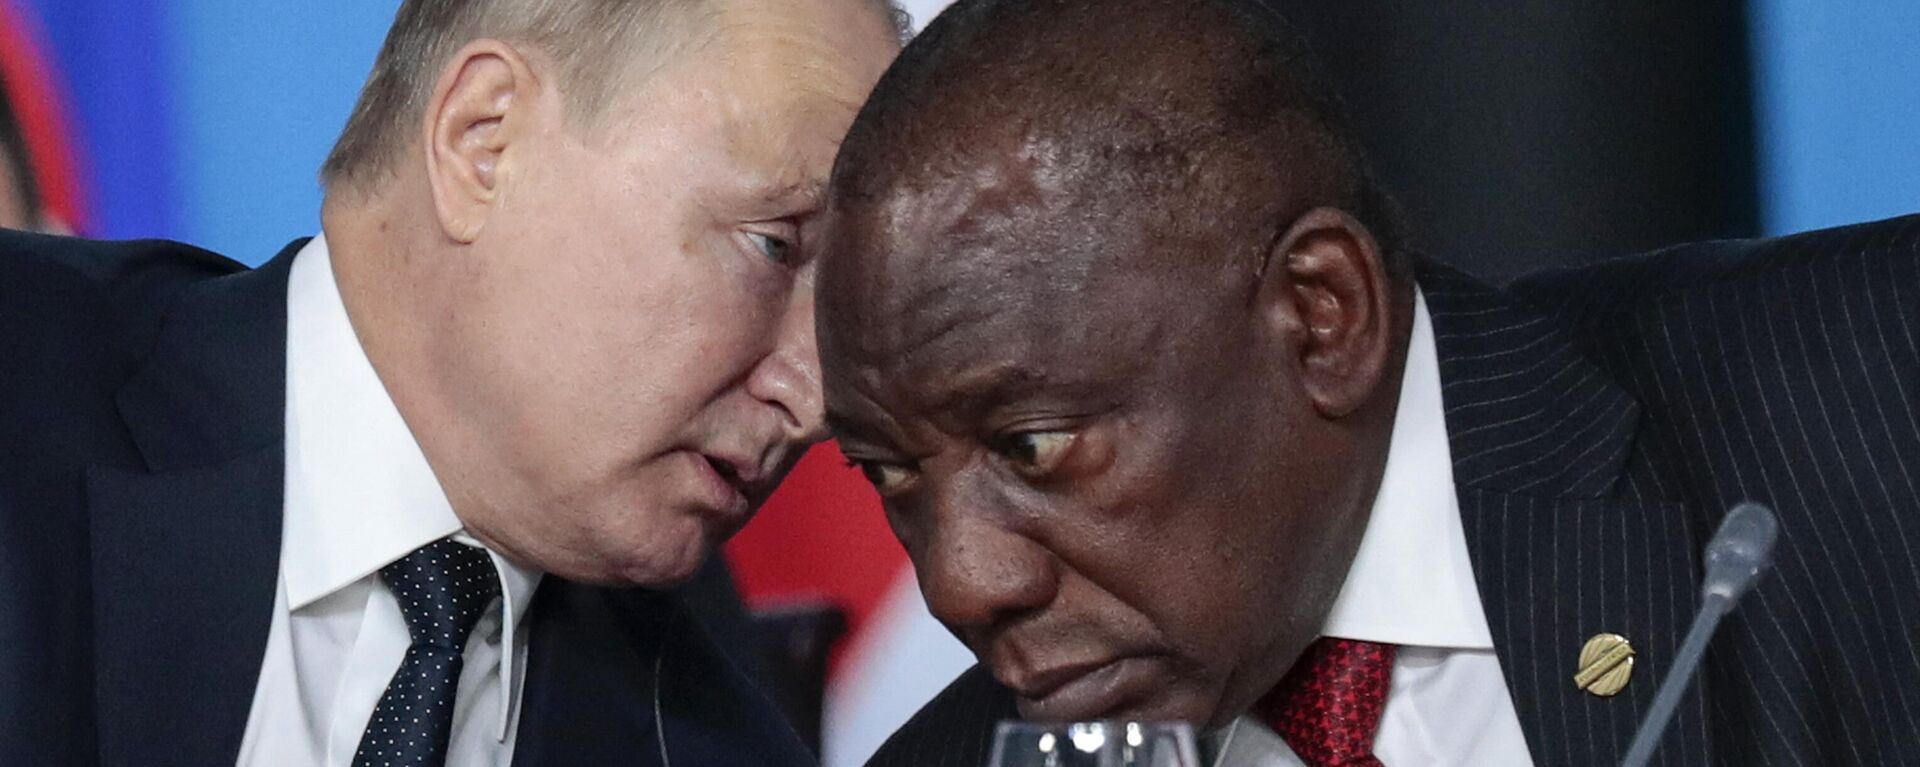 South-Africa's President Cyril Ramaphosa (L) and Russia's President Vladimir Putin (R) attend the first plenary session as part of the 2019 Russia-Africa Summit at the Sirius Park of Science and Art in Sochi, Russia, on October 24, 2019. - Sputnik International, 1920, 10.01.2023